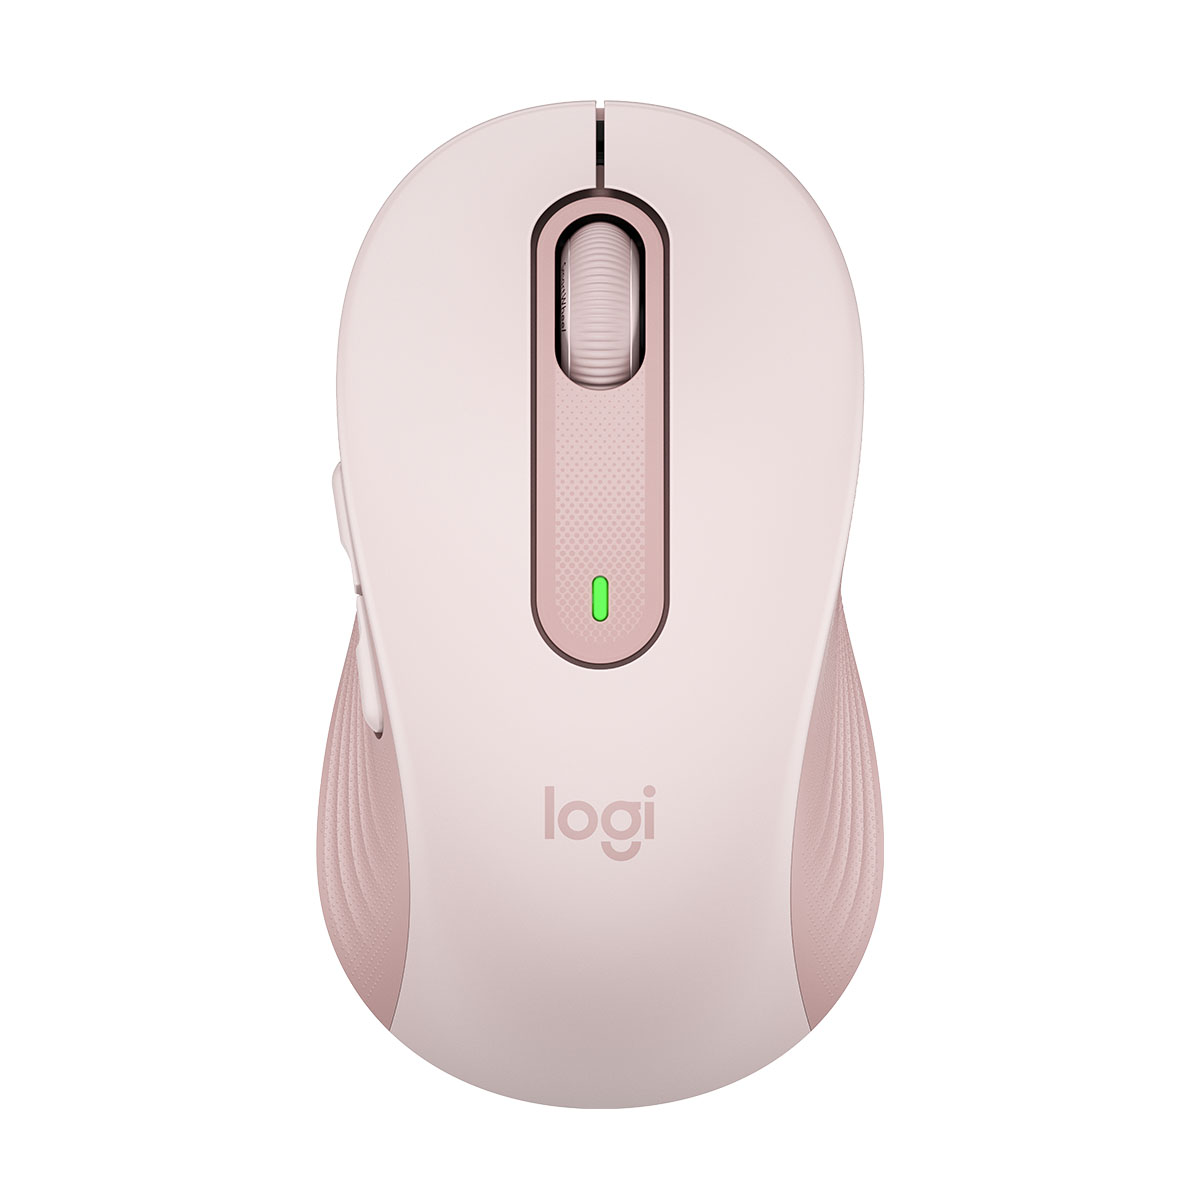 Logitech M650 Wireless Mouse, , large image number 1